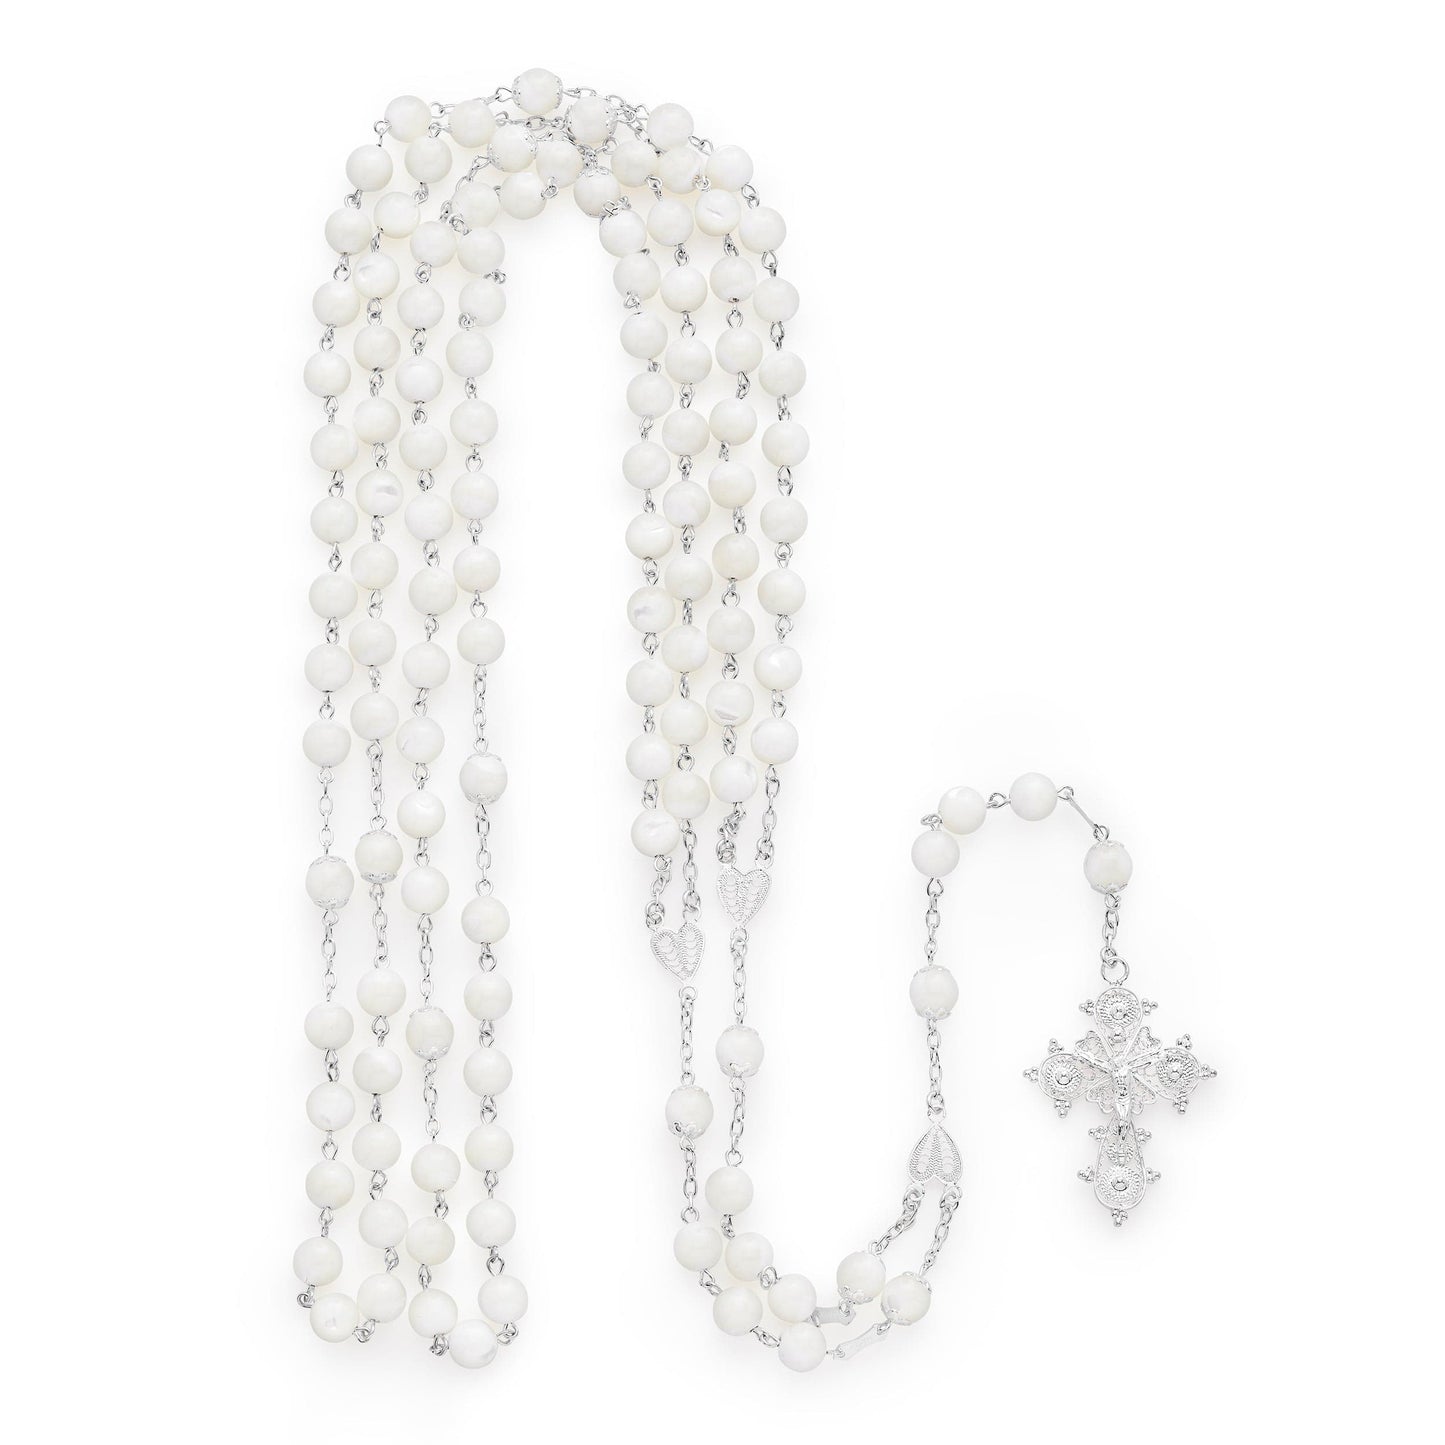 MONDO CATTOLICO Prayer Beads 67 cm (26.4 in) / 6 mm(0.23 in) Sterling Silver Wedding Rosary